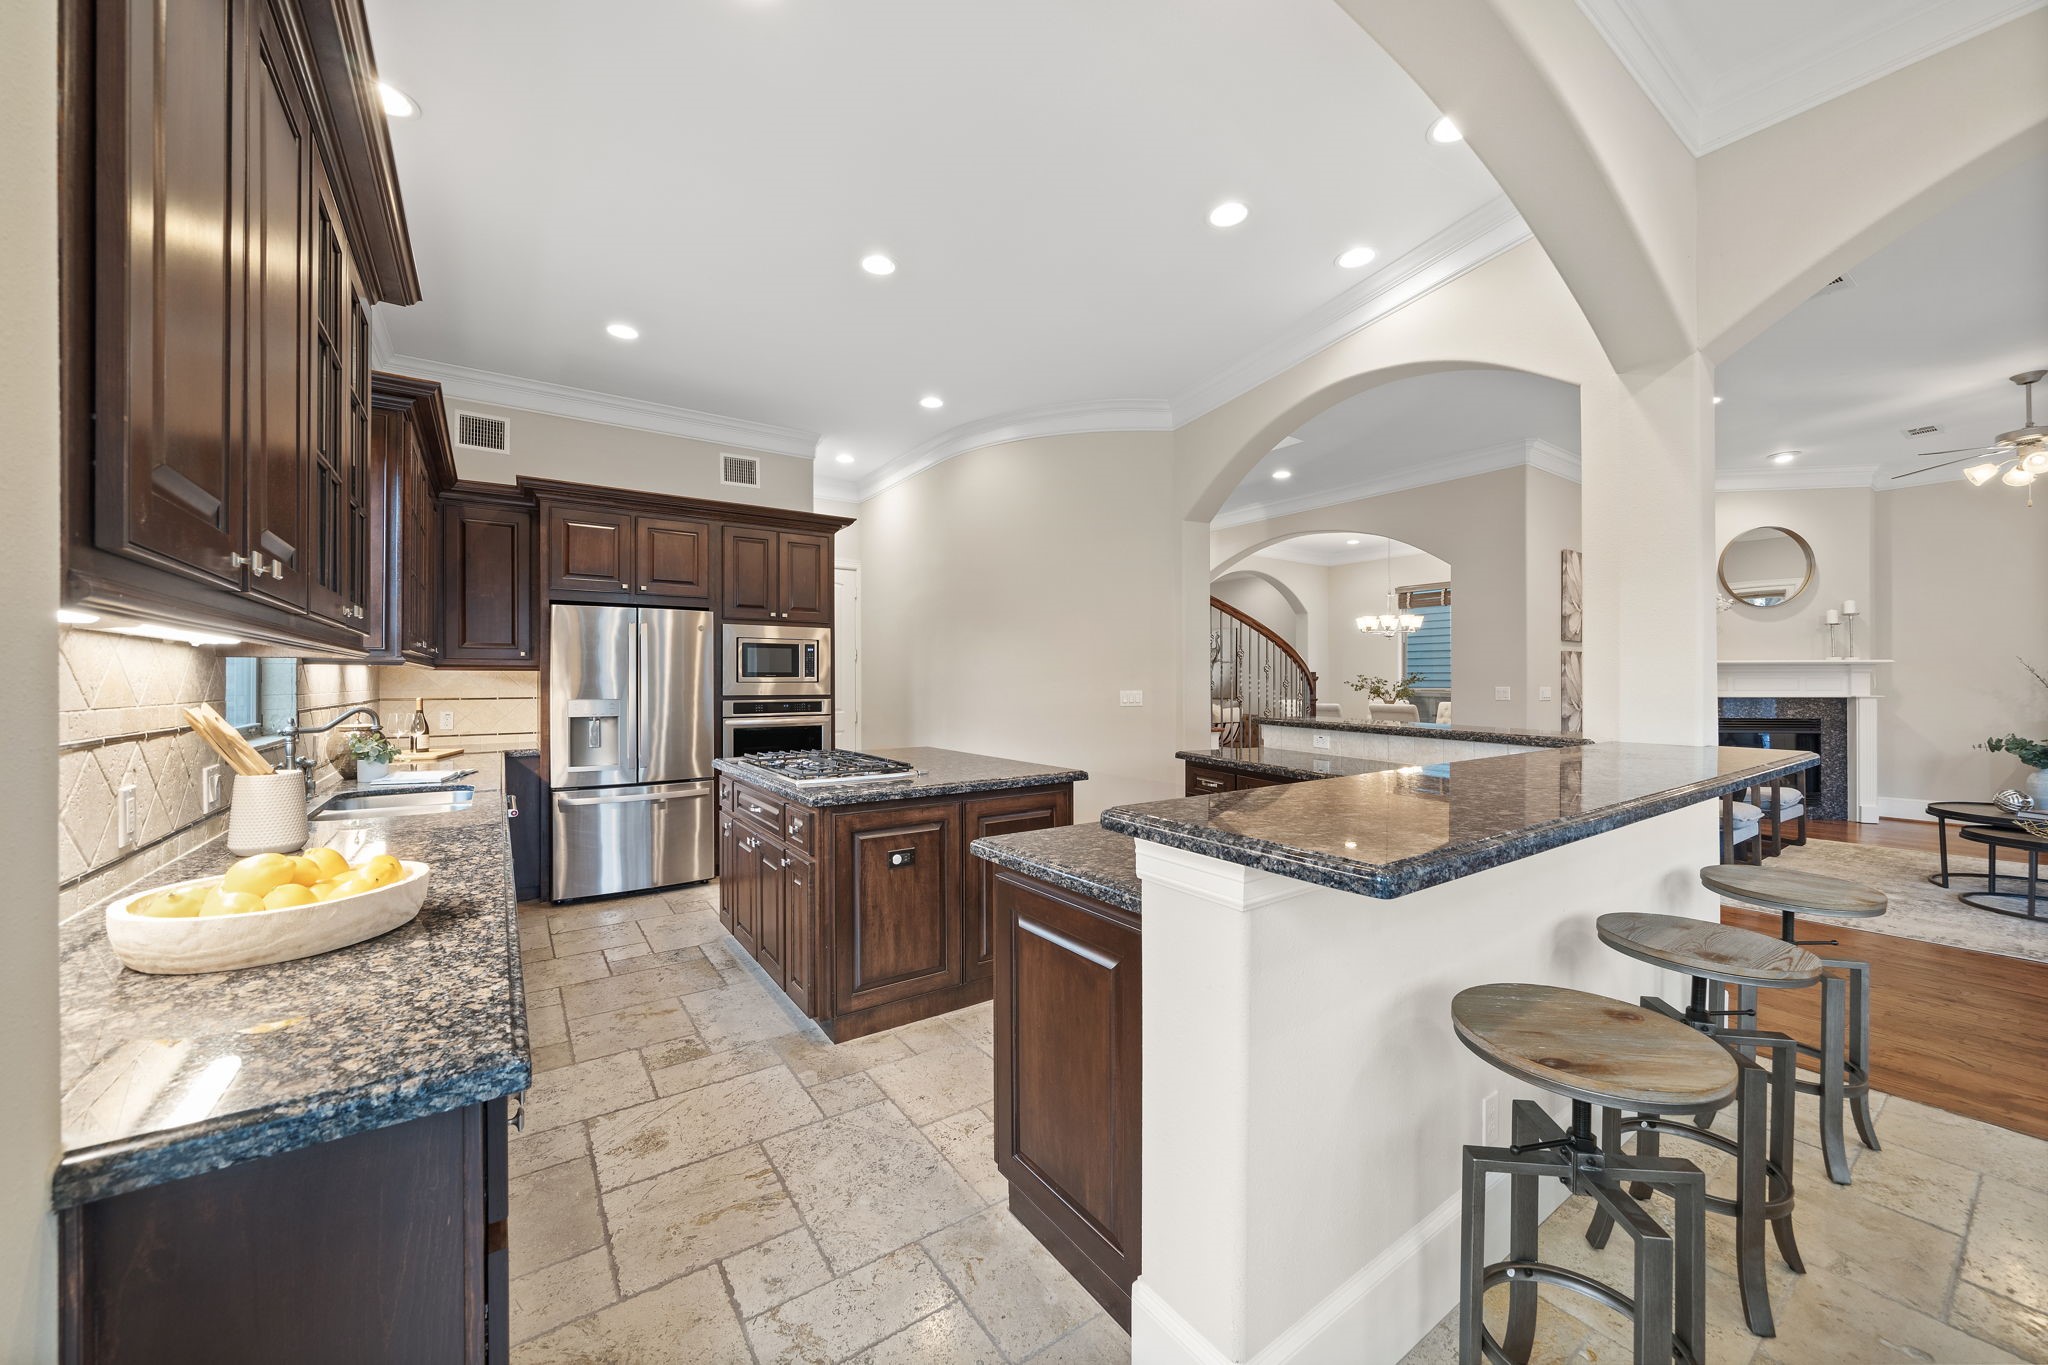 The generous open kitchen is a chef's delight, appointed with granite countertops, two breakfast bars, stainless steel appliances, a spacious island, excellent lighting, and a stunning tile backsplash. Find abundant storage space courtesy of the walk-in pantry and numerous custom cabinetry.